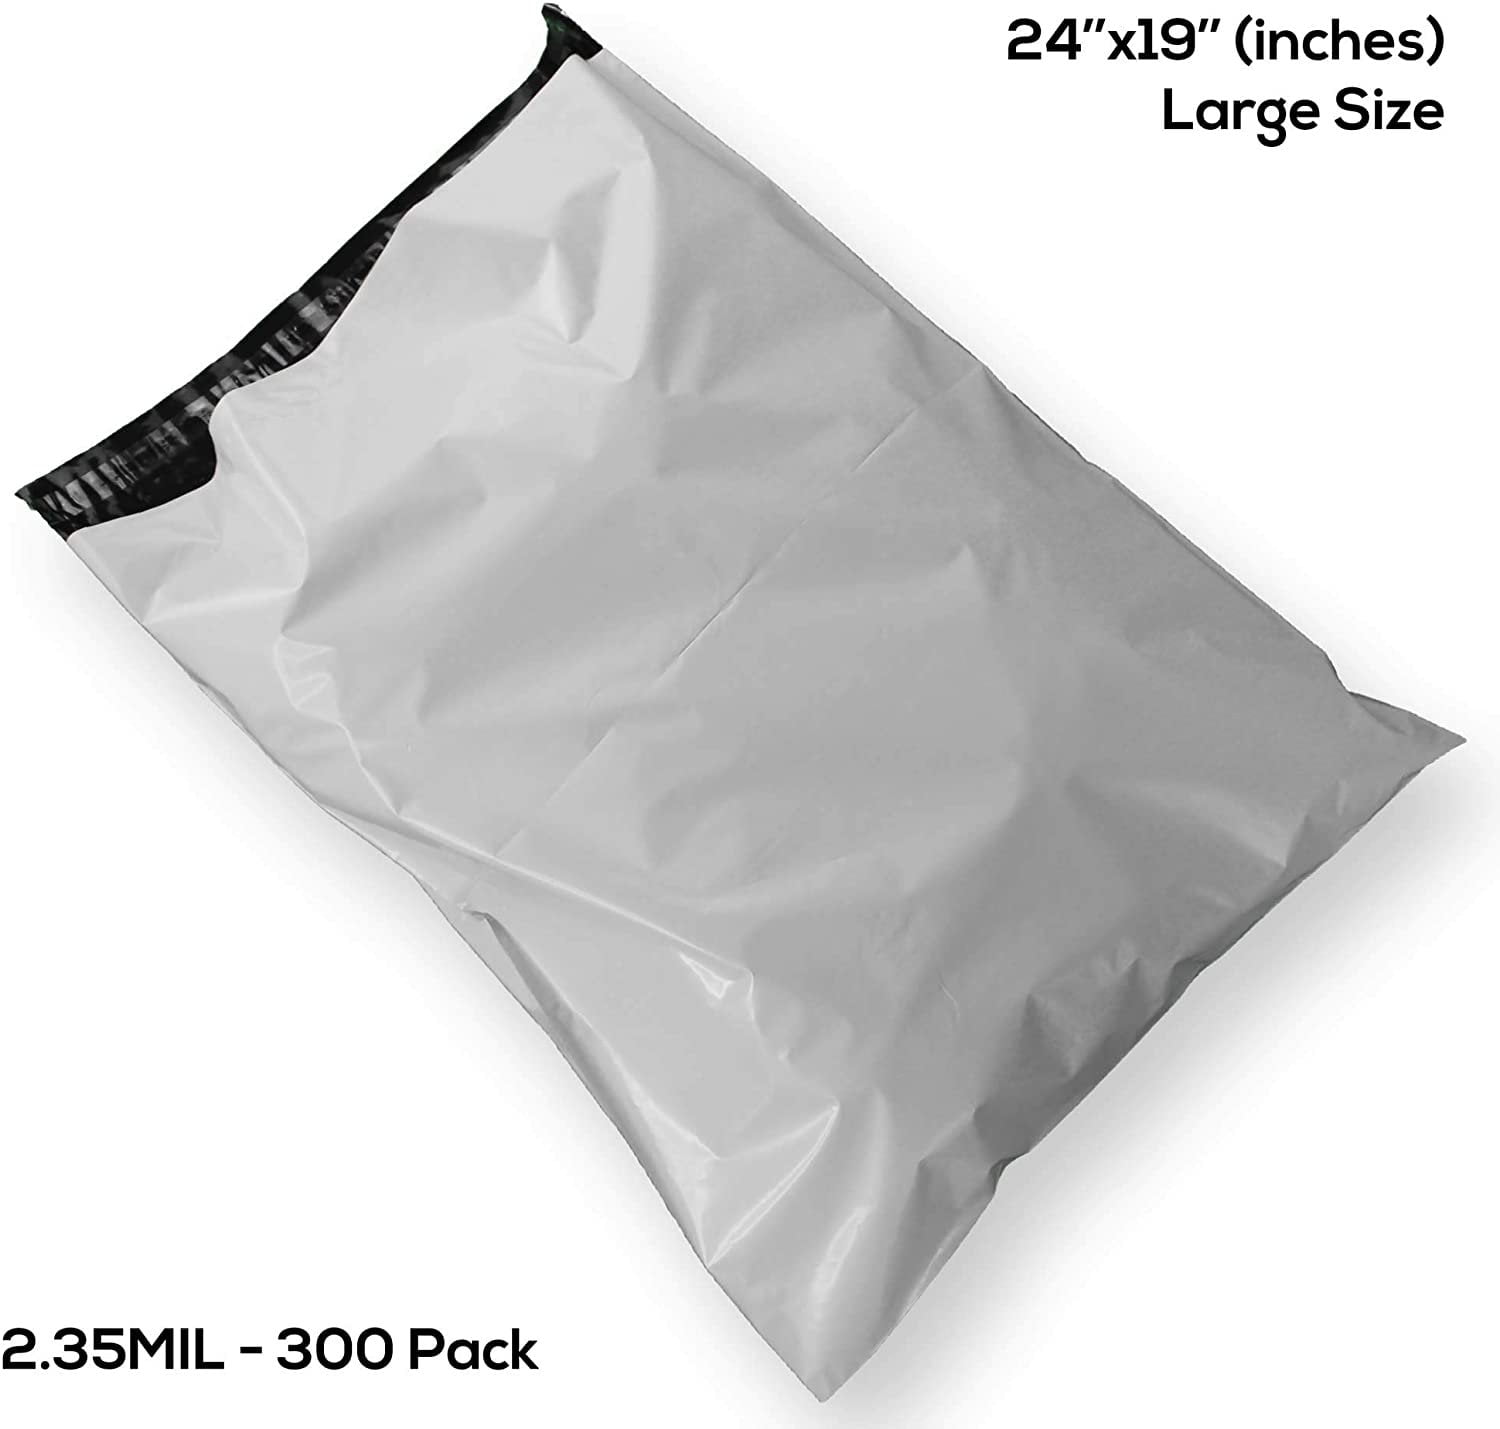 Lot 100 10"x13" 2 MIL Poly Mailers Shipping Bags Envelopes Packaging Premium Bag 